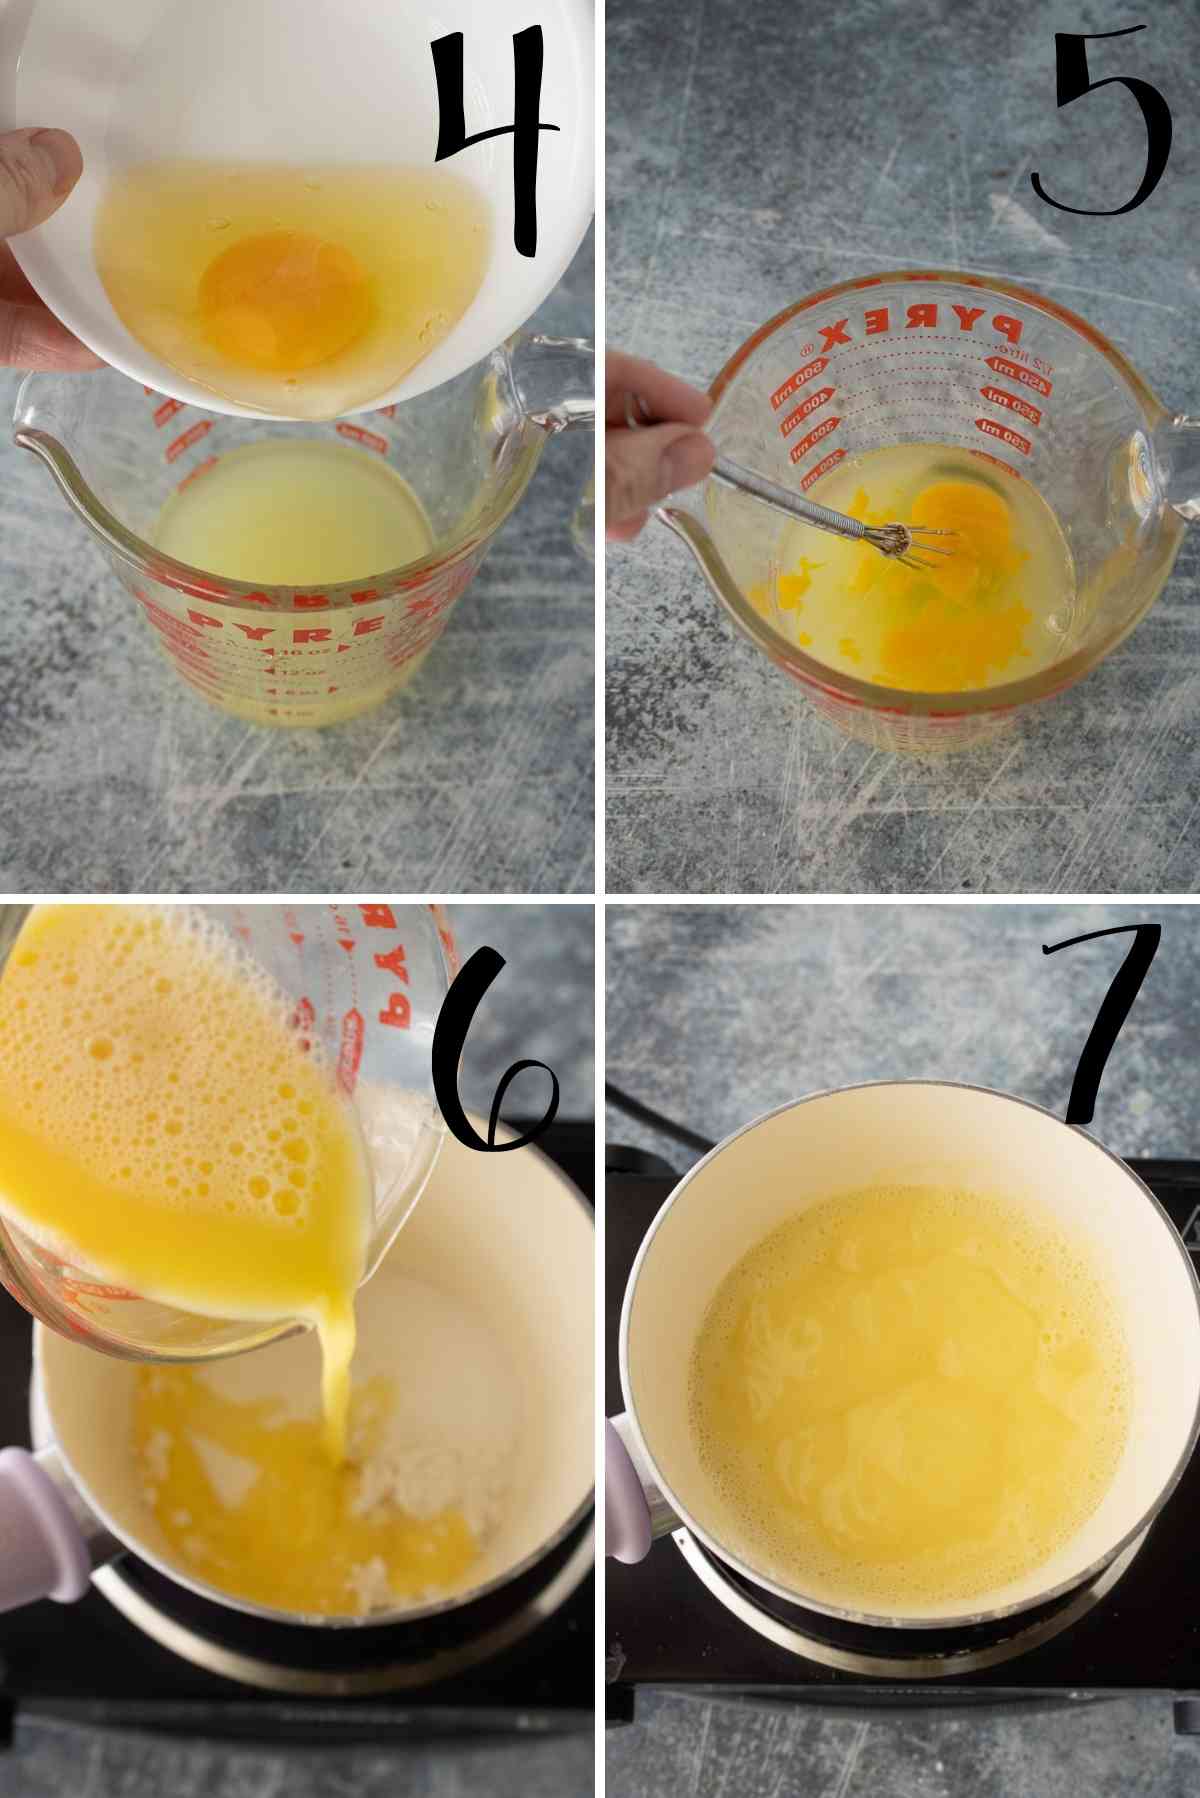 Drain pineapple juice in to a measuring cup, whisk in egg, add to pot and bring to a simmer.